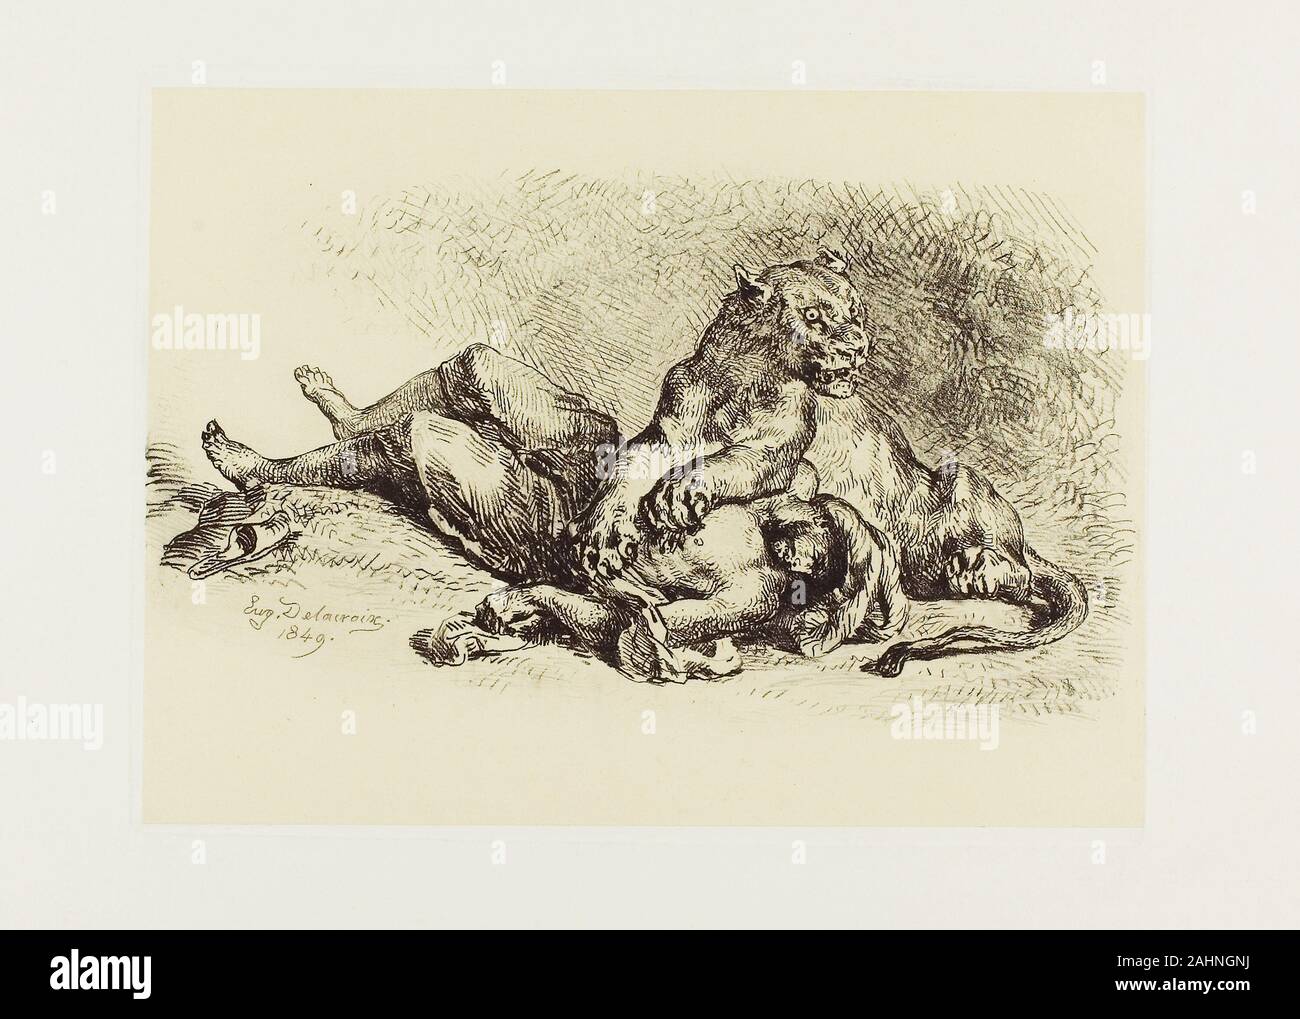 Eugène Delacroix. Lioness Tearing at the Chest of an Arab. 1849. France. Soft ground etching and roulette on cream chine, laid down on white wove paper Delacroix’s Romantic fascination with the Oriental other and the savagery of nature comes to the fore in this delicate etching in which a turbaned Arab becomes a lioness’s prey. Pinioned by the lion’s mighty paws, the man no longer struggles but resigns himself to being rent asunder. The man’s eyes are in shadow while the animal’s are wide and fierce, a contrast underscoring the violence and the intimacy of the kill. Details such as the single Stock Photo